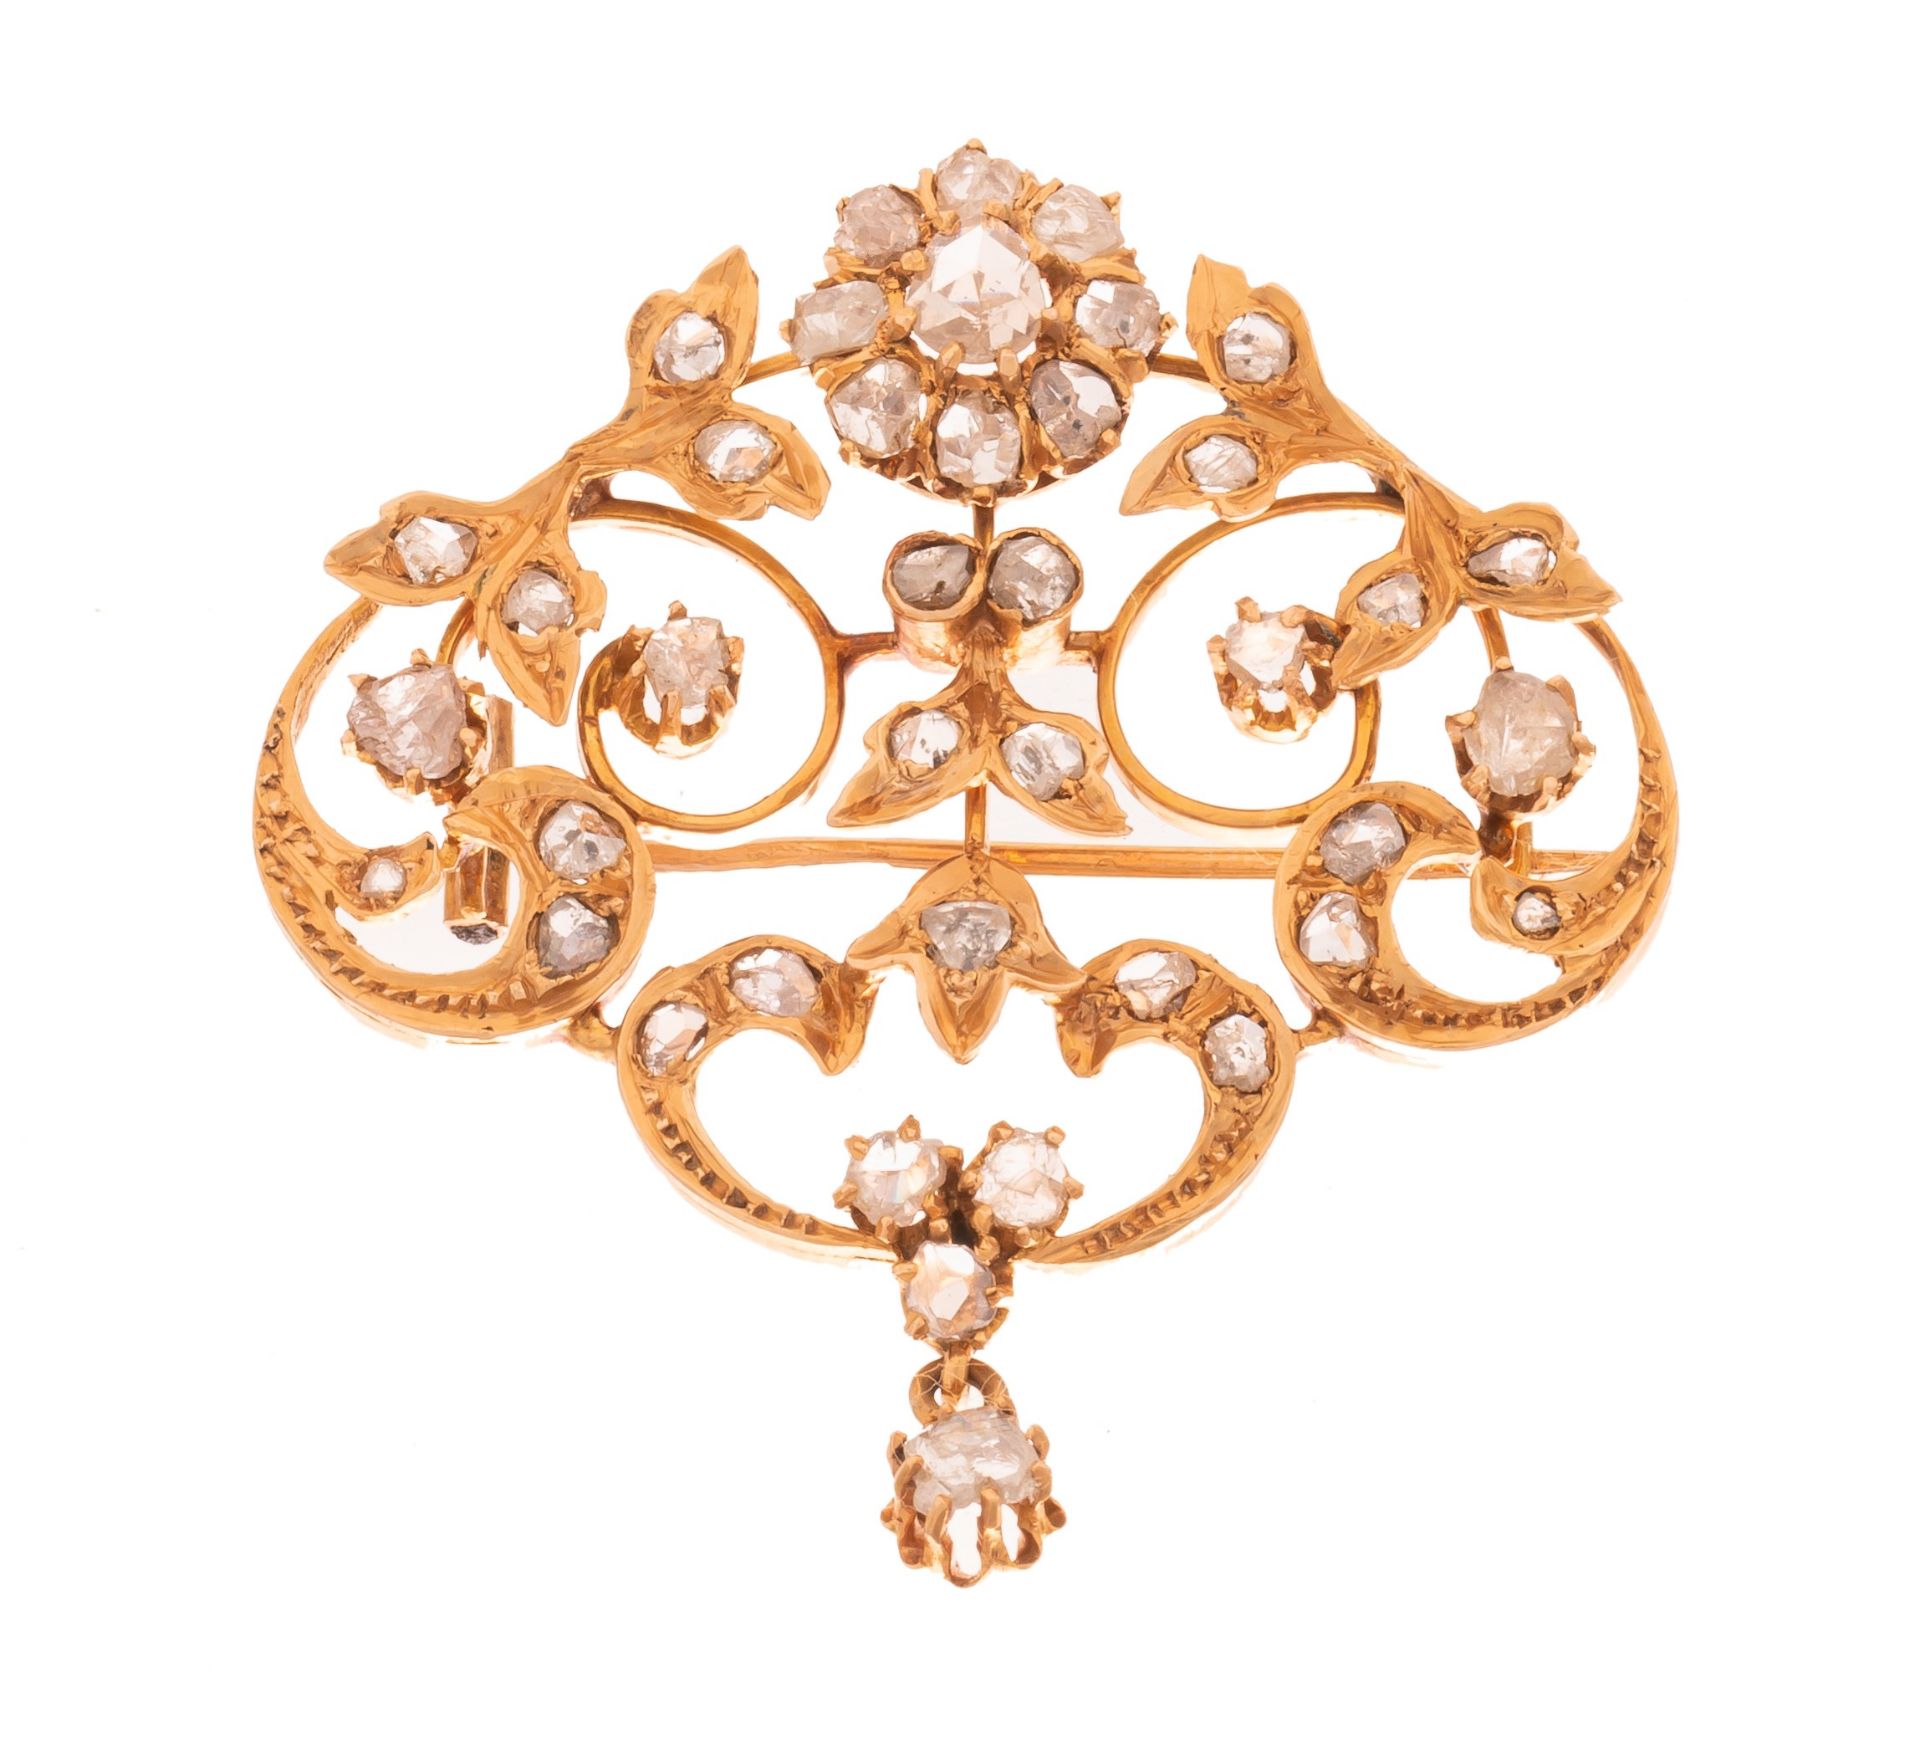 A Belle Epoque brooch in 18ct yellow gold, with rose-cut diamonds, H 4,2 cm - 8 g